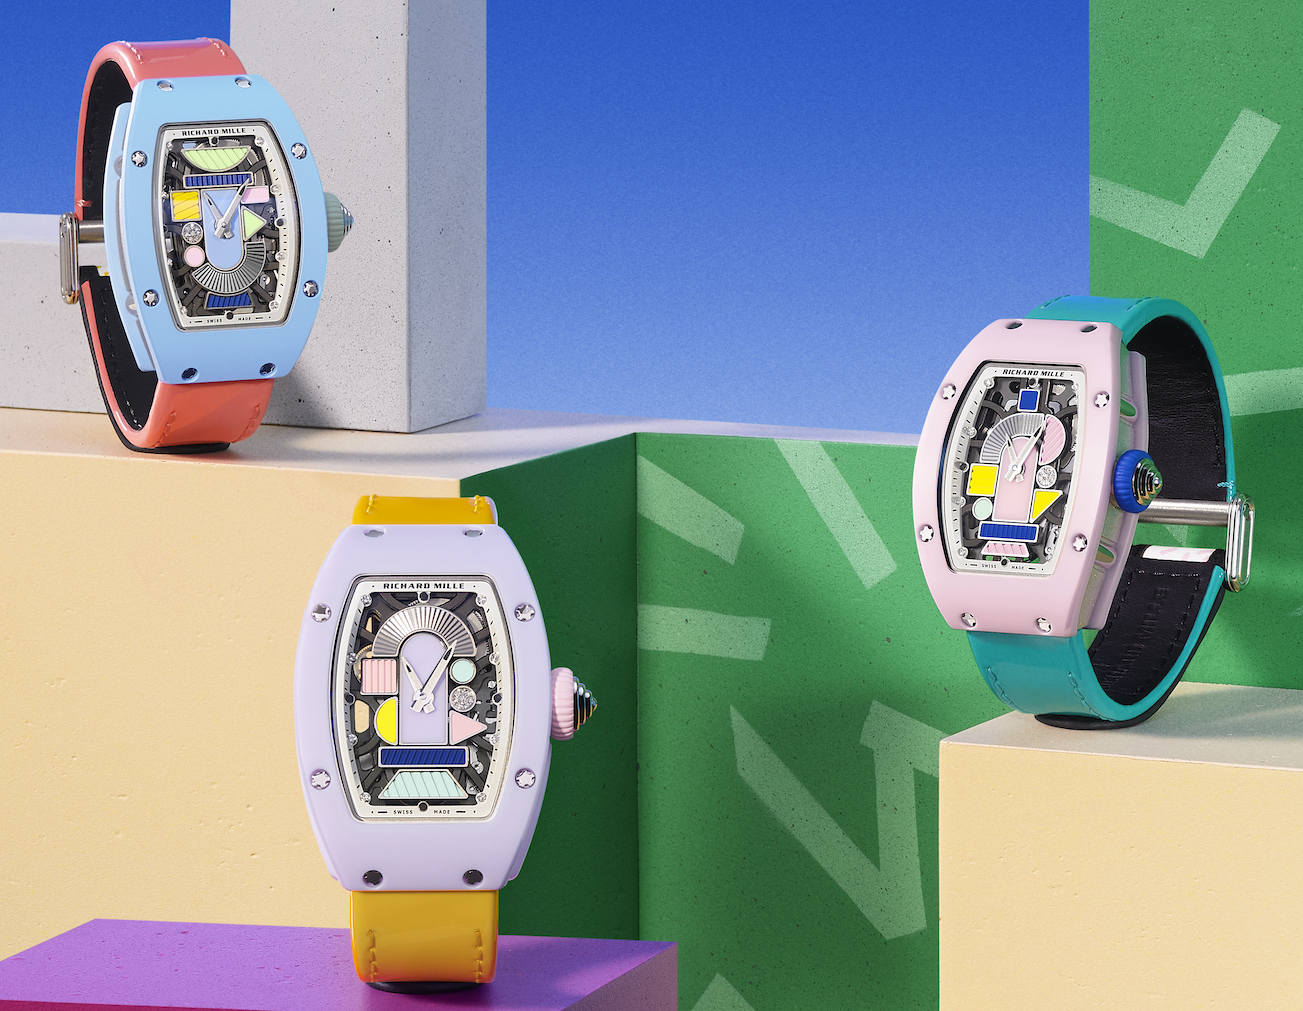 "Endless summer": New Richard Mille’s RM07-01 Color Ceramic Capsule Collection